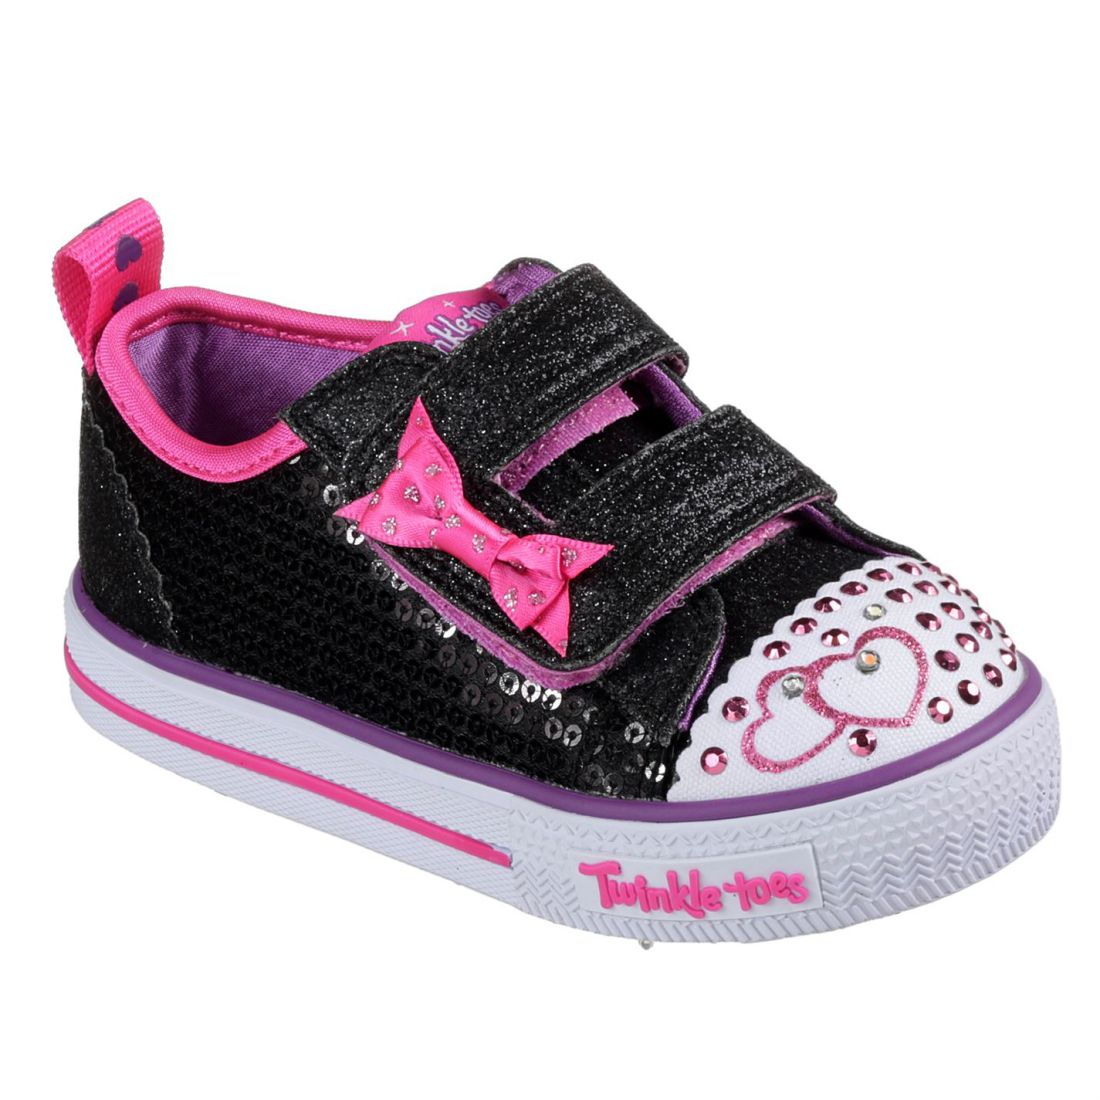 Skechers Kids Girls Twinkle Toes Itsy Bitsy Shoes Infant Canvas Low ...